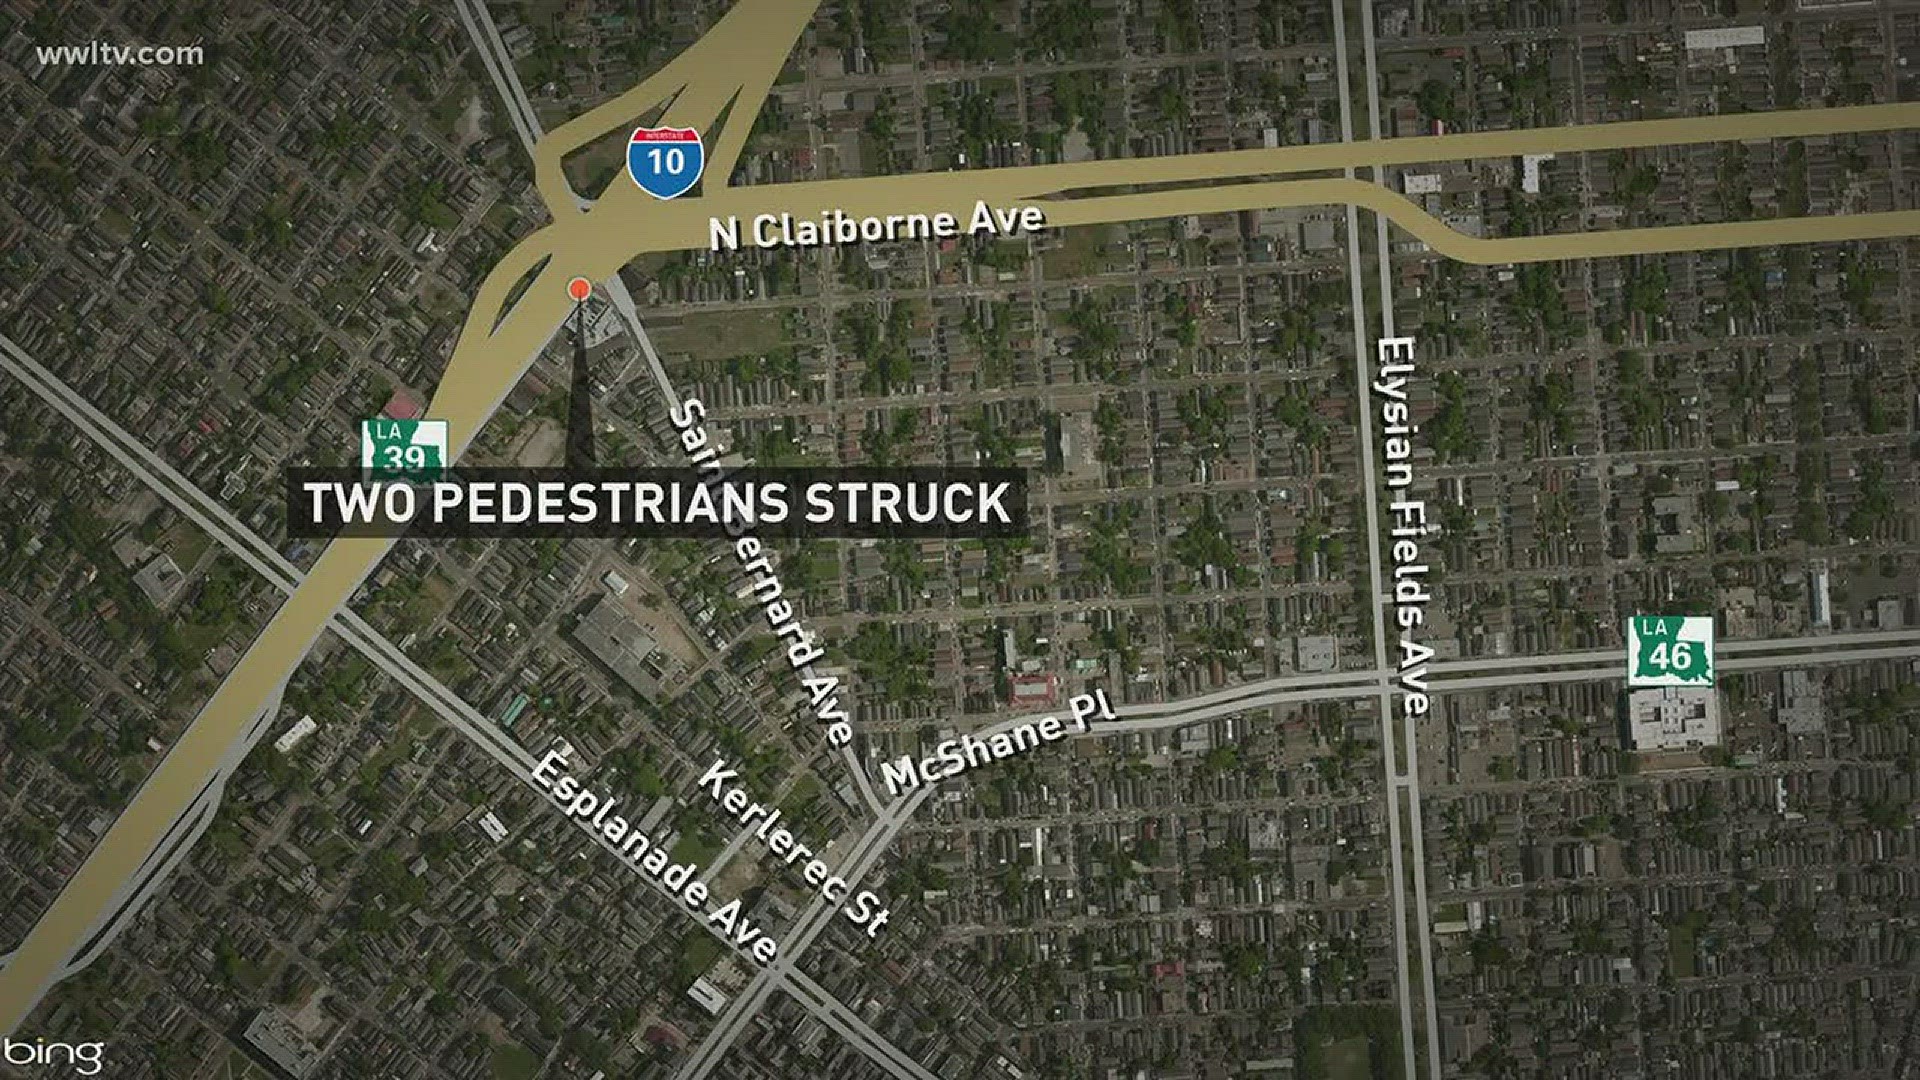 The crash occurred on Saturday around 1:30 p.m. near the intersection of North Claiborne Avenue and St. Bernard Avenue.